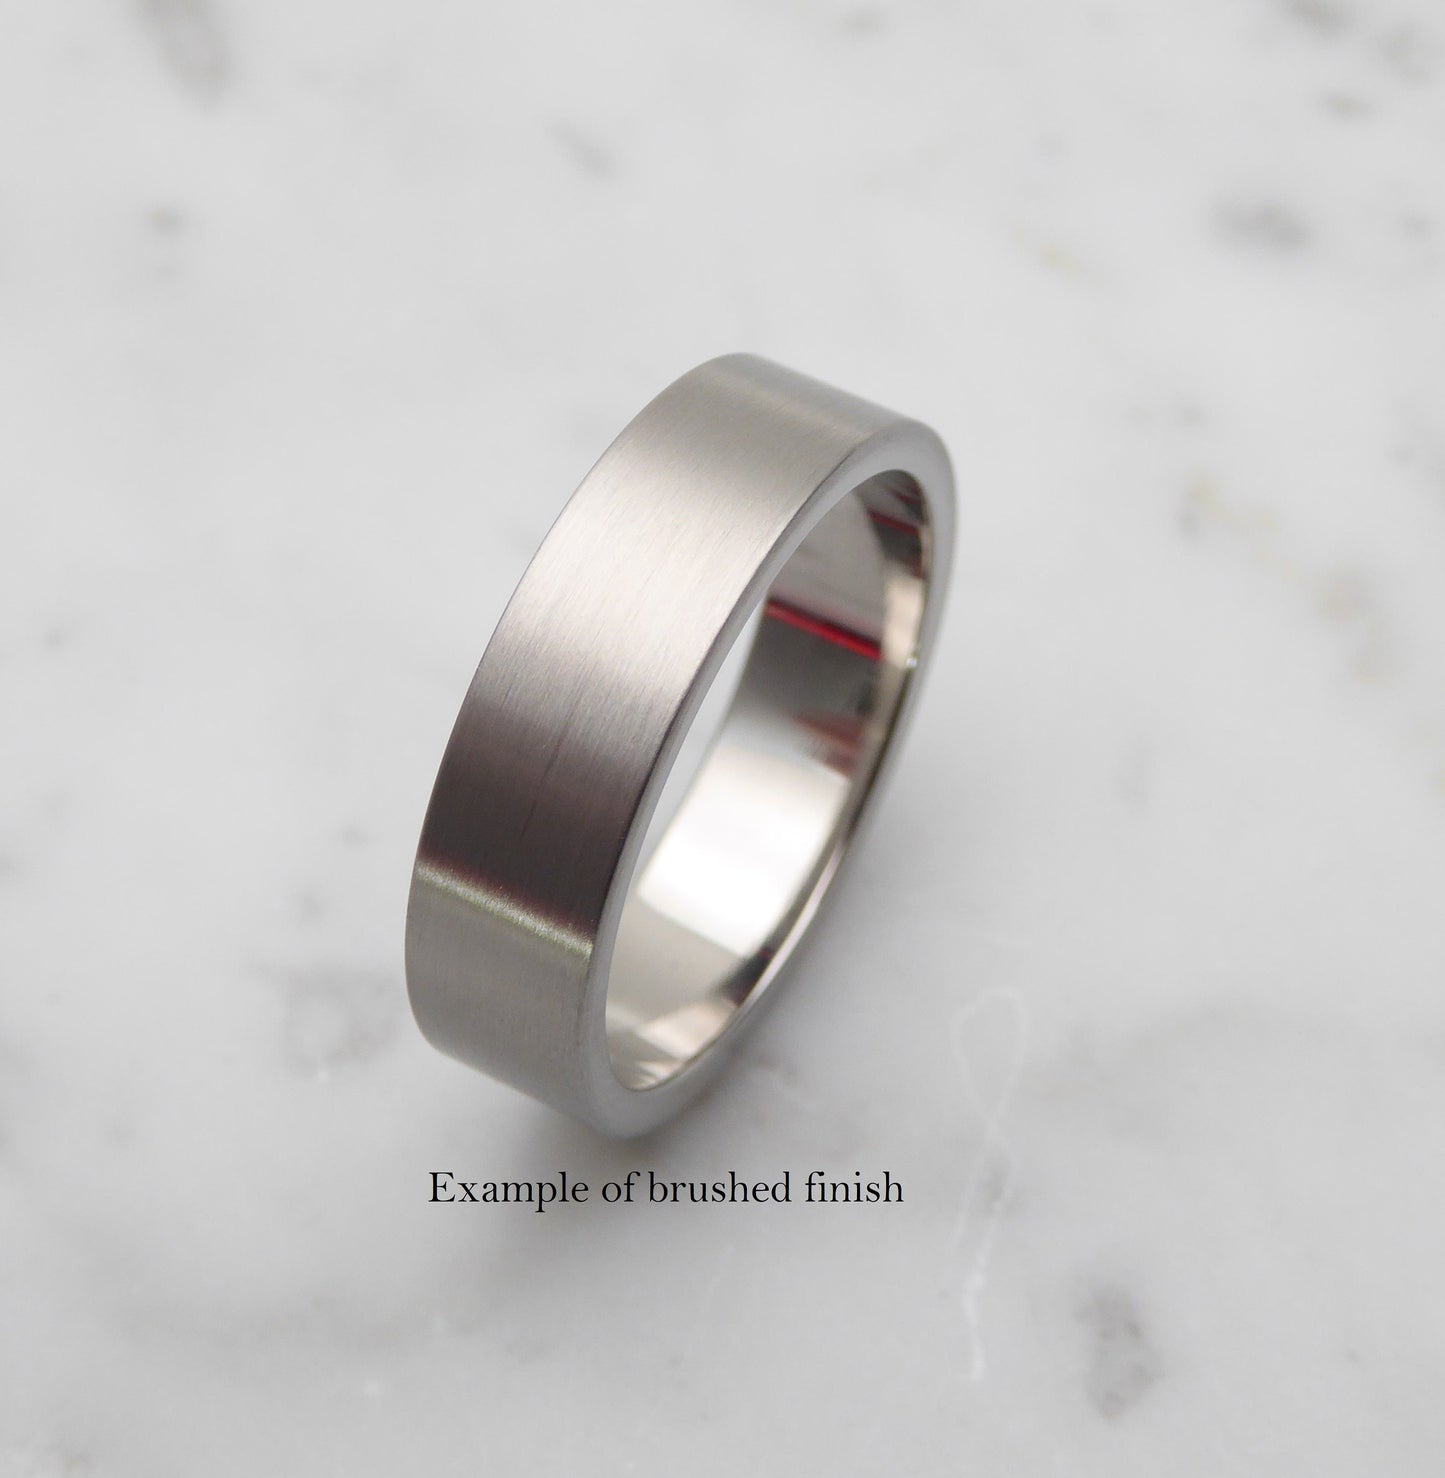 6mm Titanium Flat / Square Mens / Womens Plain band Wedding Ring - Available in polished and brushed finishes